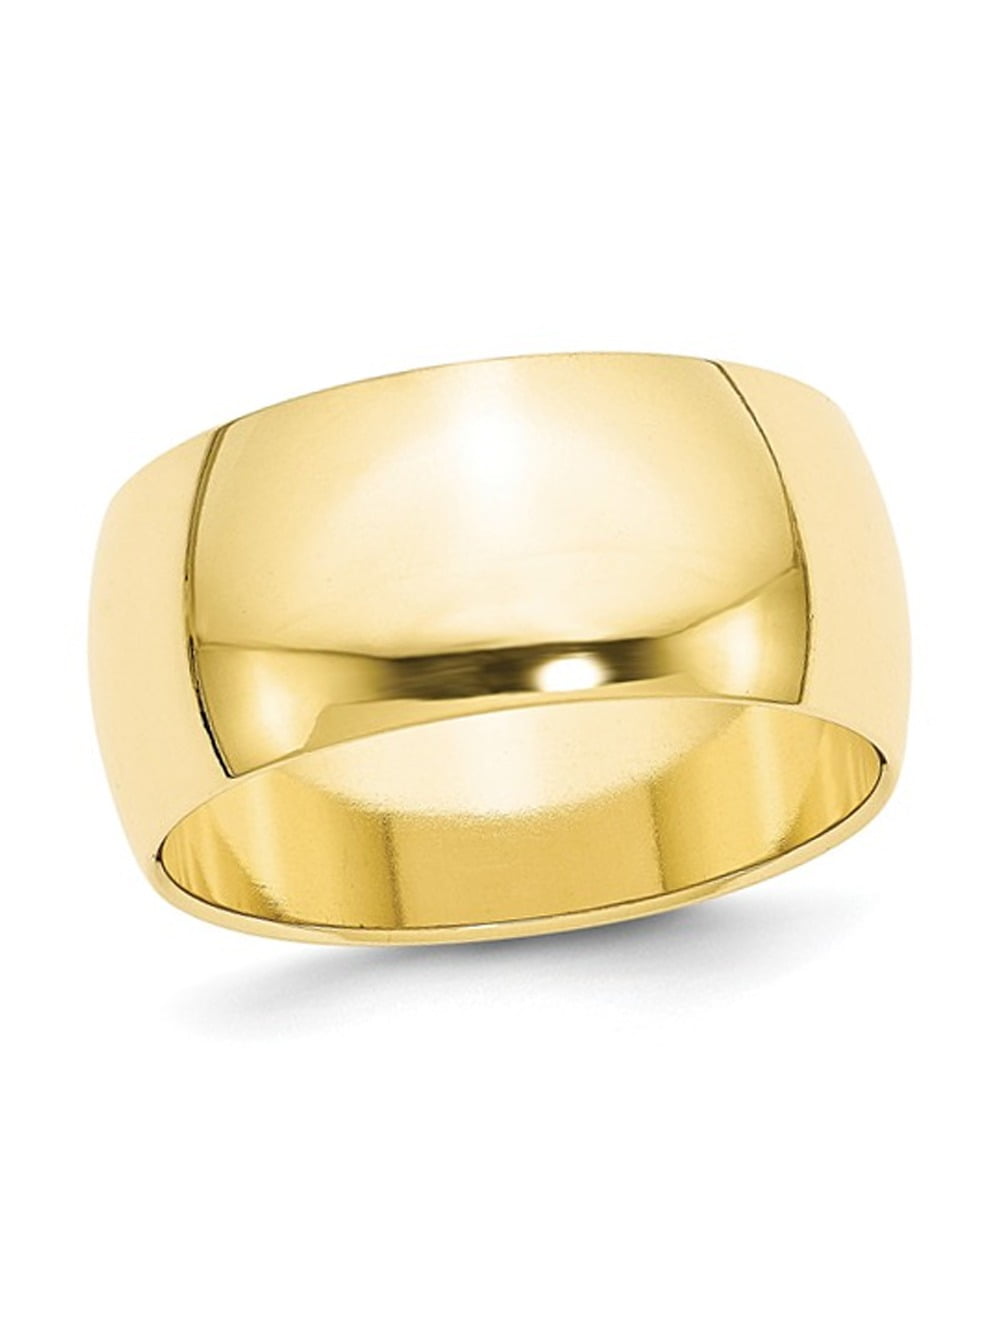 10k Yellow Gold Mercedes Ring, Gold Men's Rings, Mens Nugget Rings, Gold  Jewelry | eBay